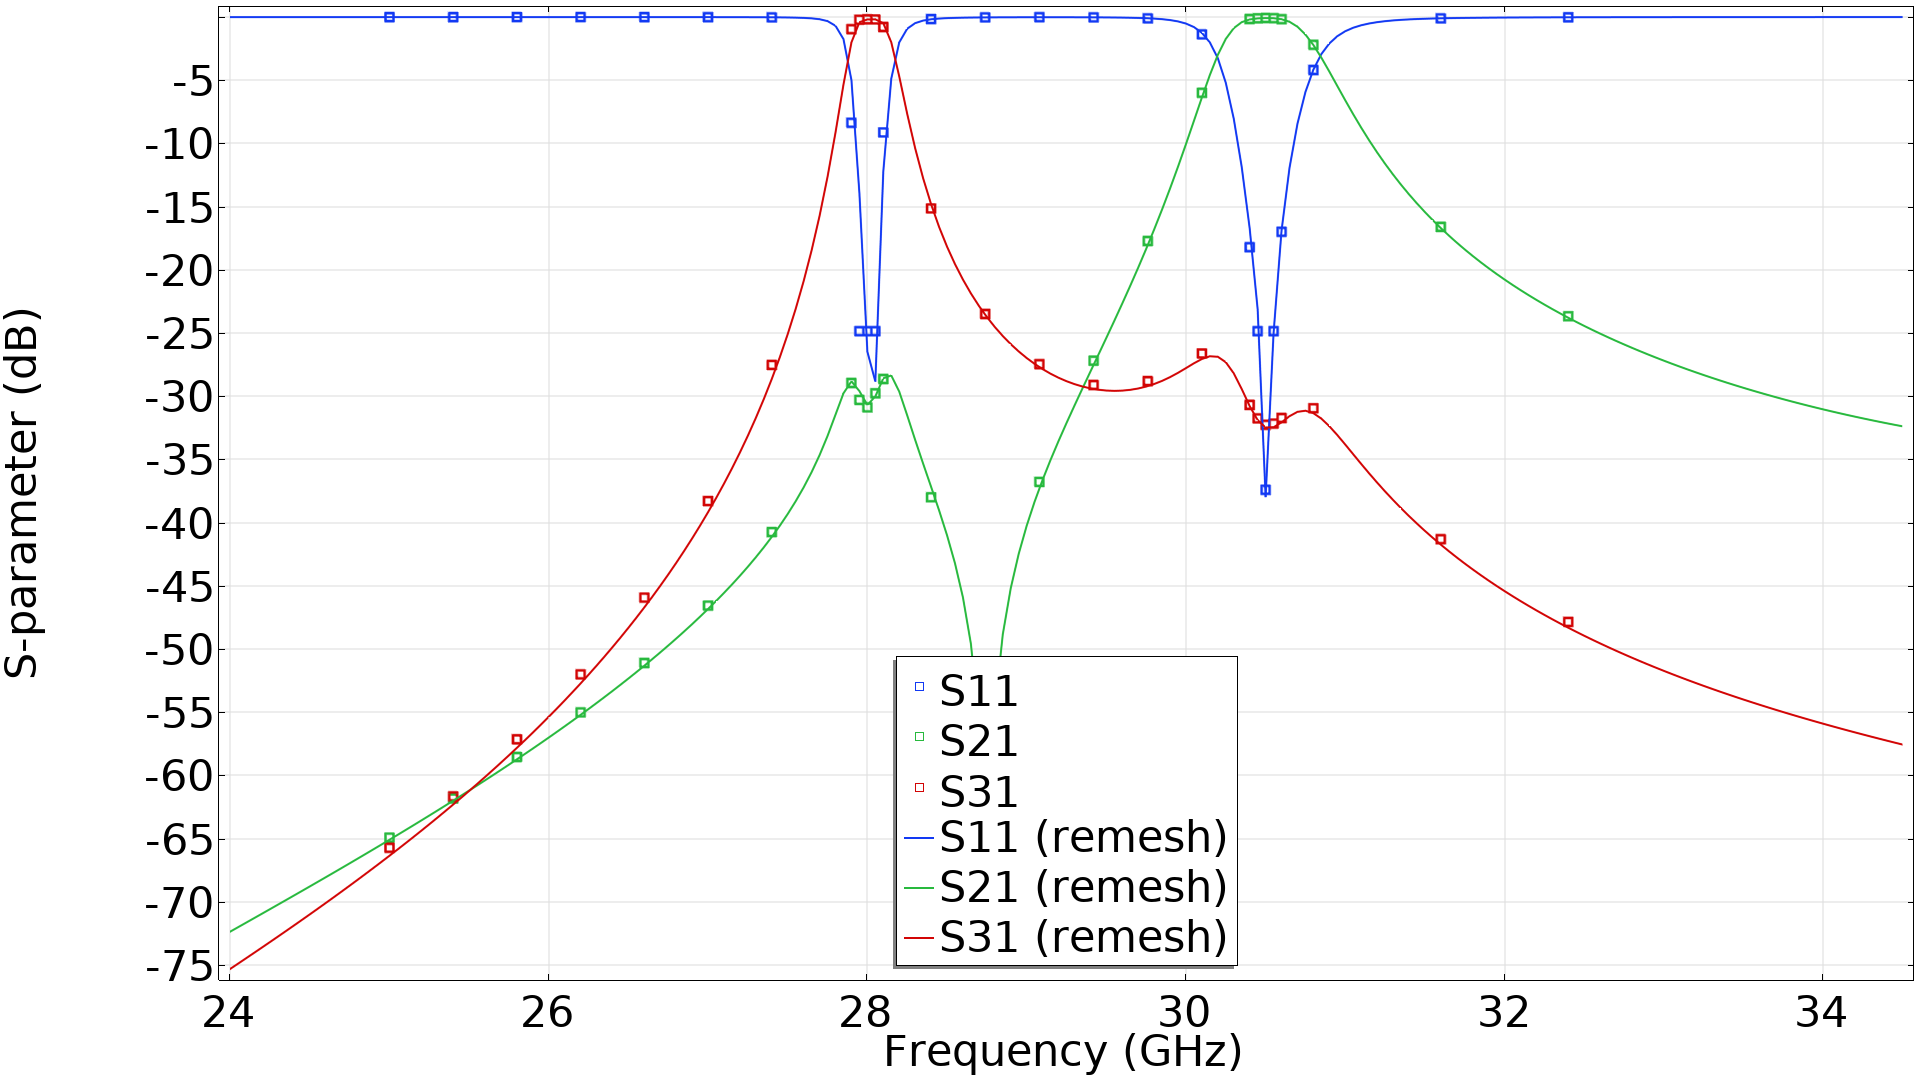 A graph showing the S-parameters plotted as a function of frequency for example 2.